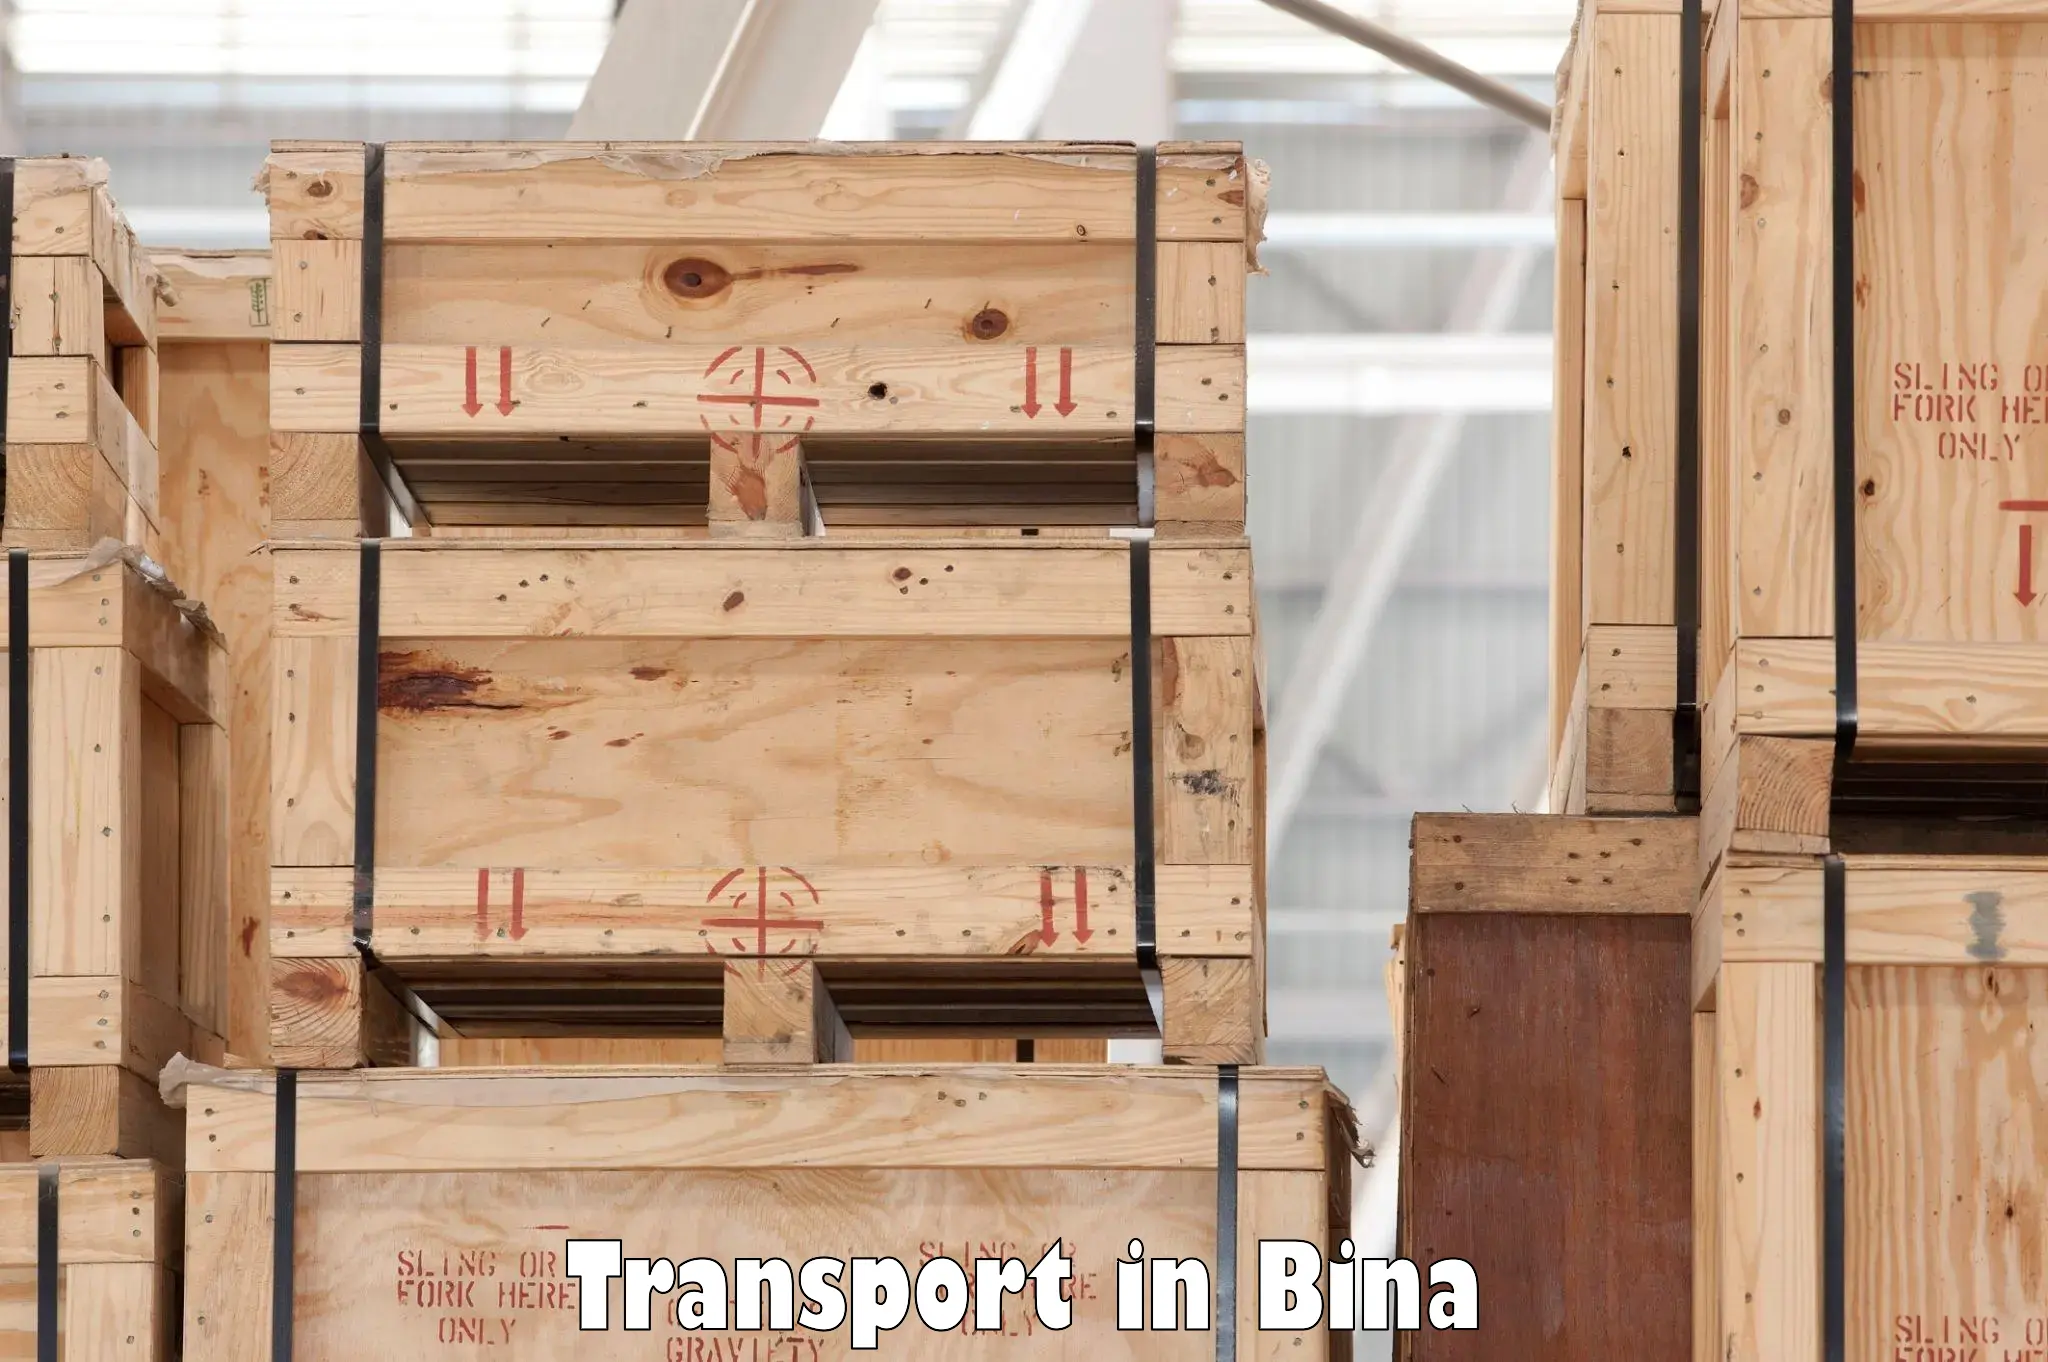 Container transport service in Bina